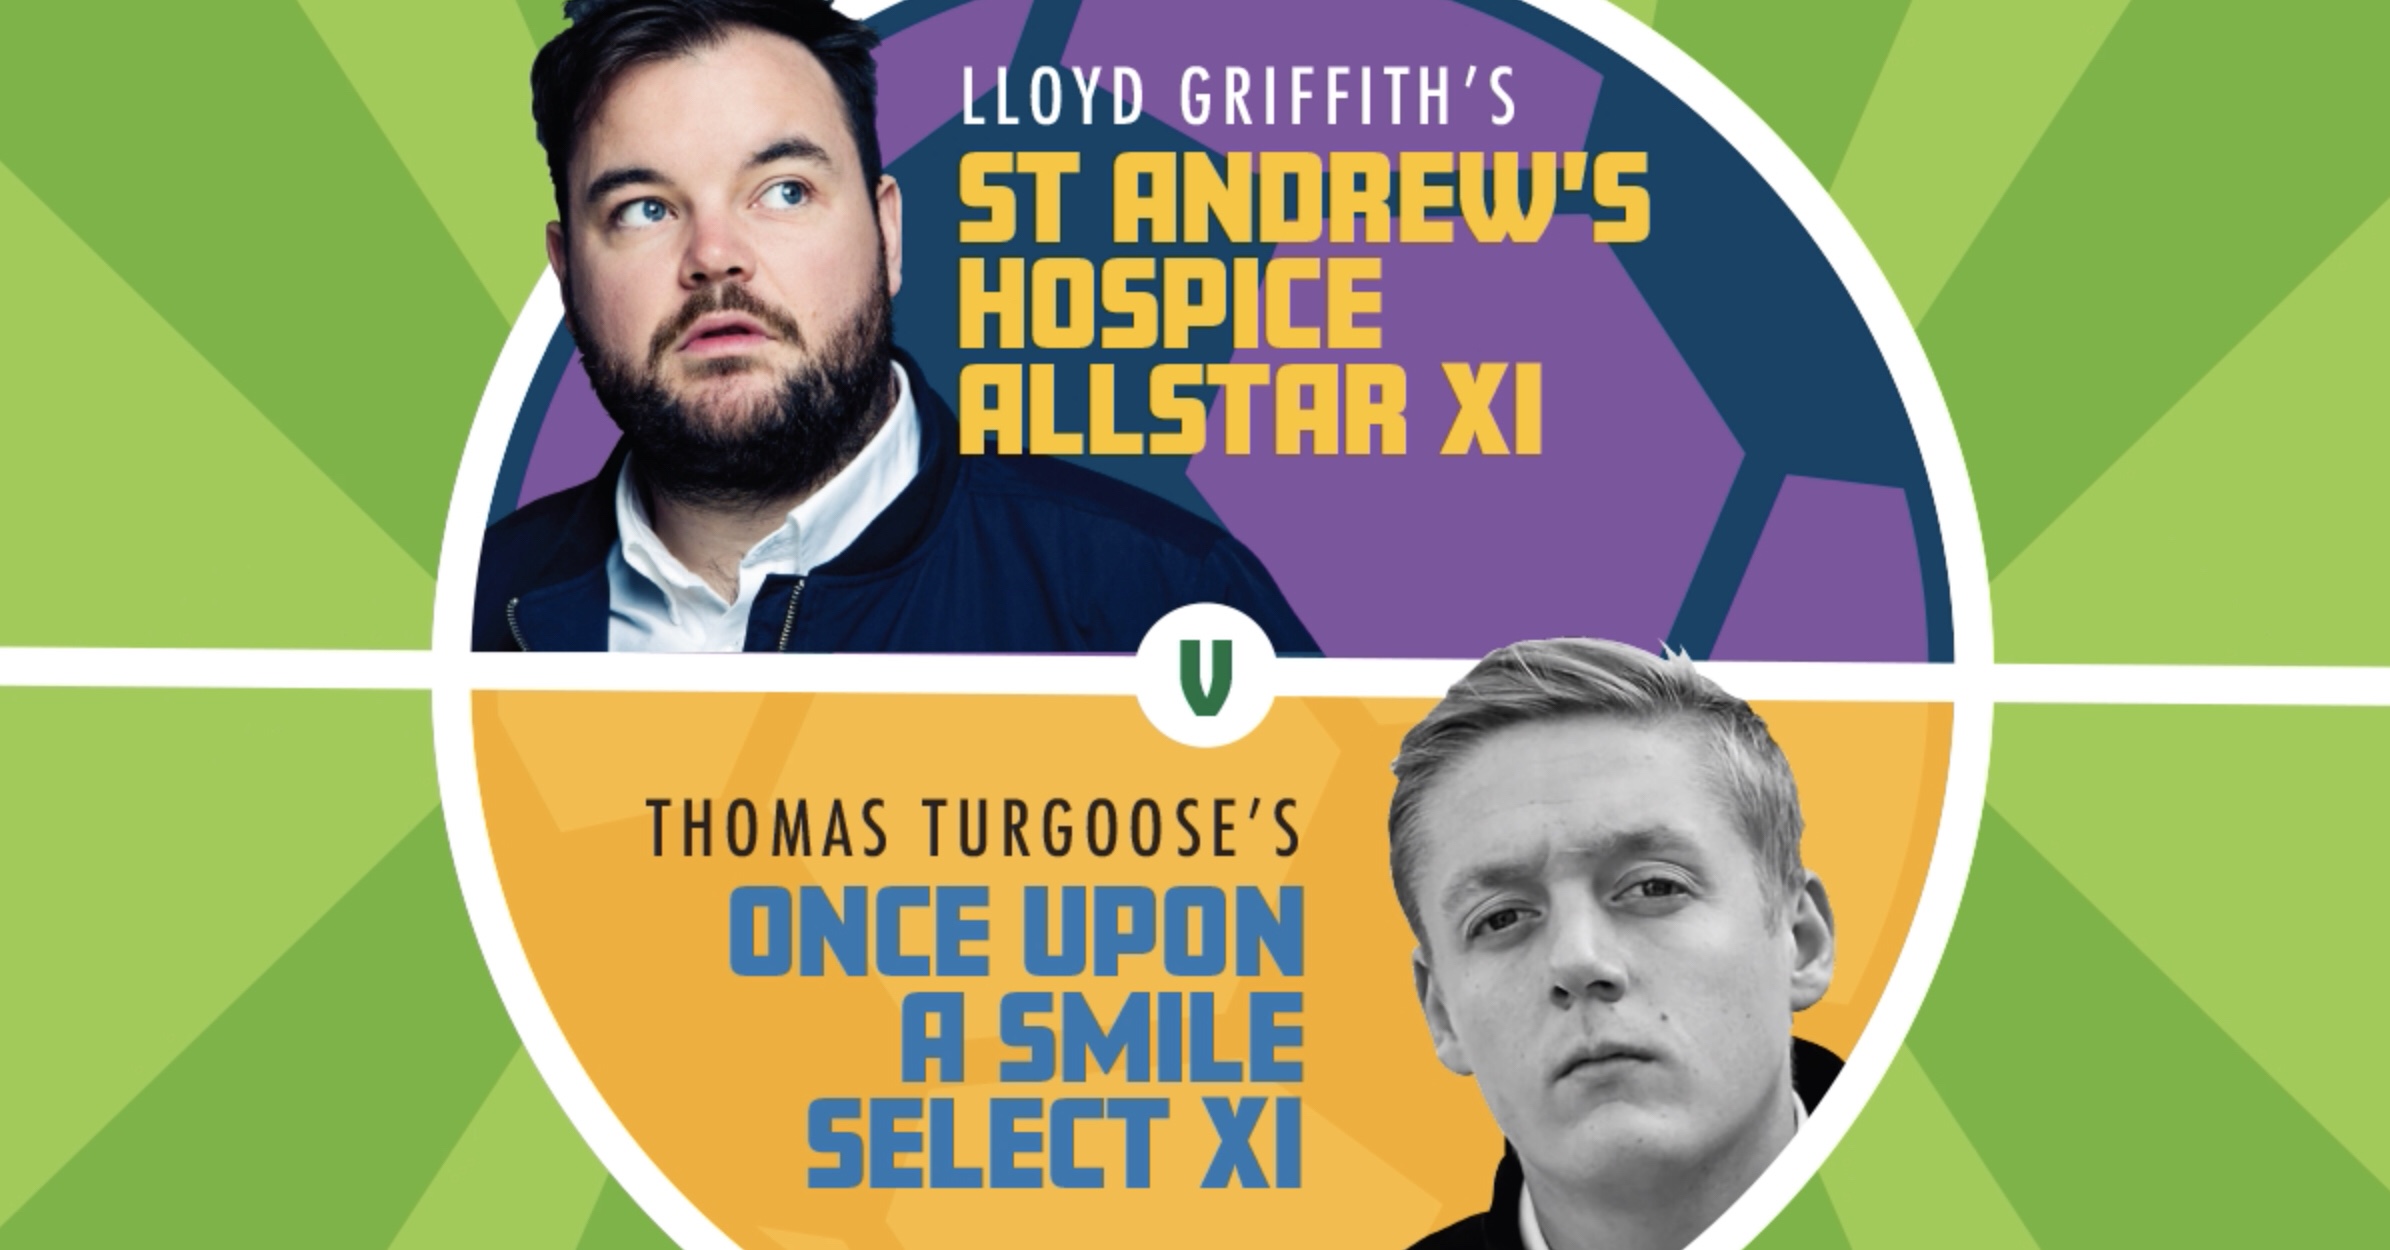 Celebrity Grimsby duo Lloyd Griffith and Tommy Turgoose go head to head in charity football match